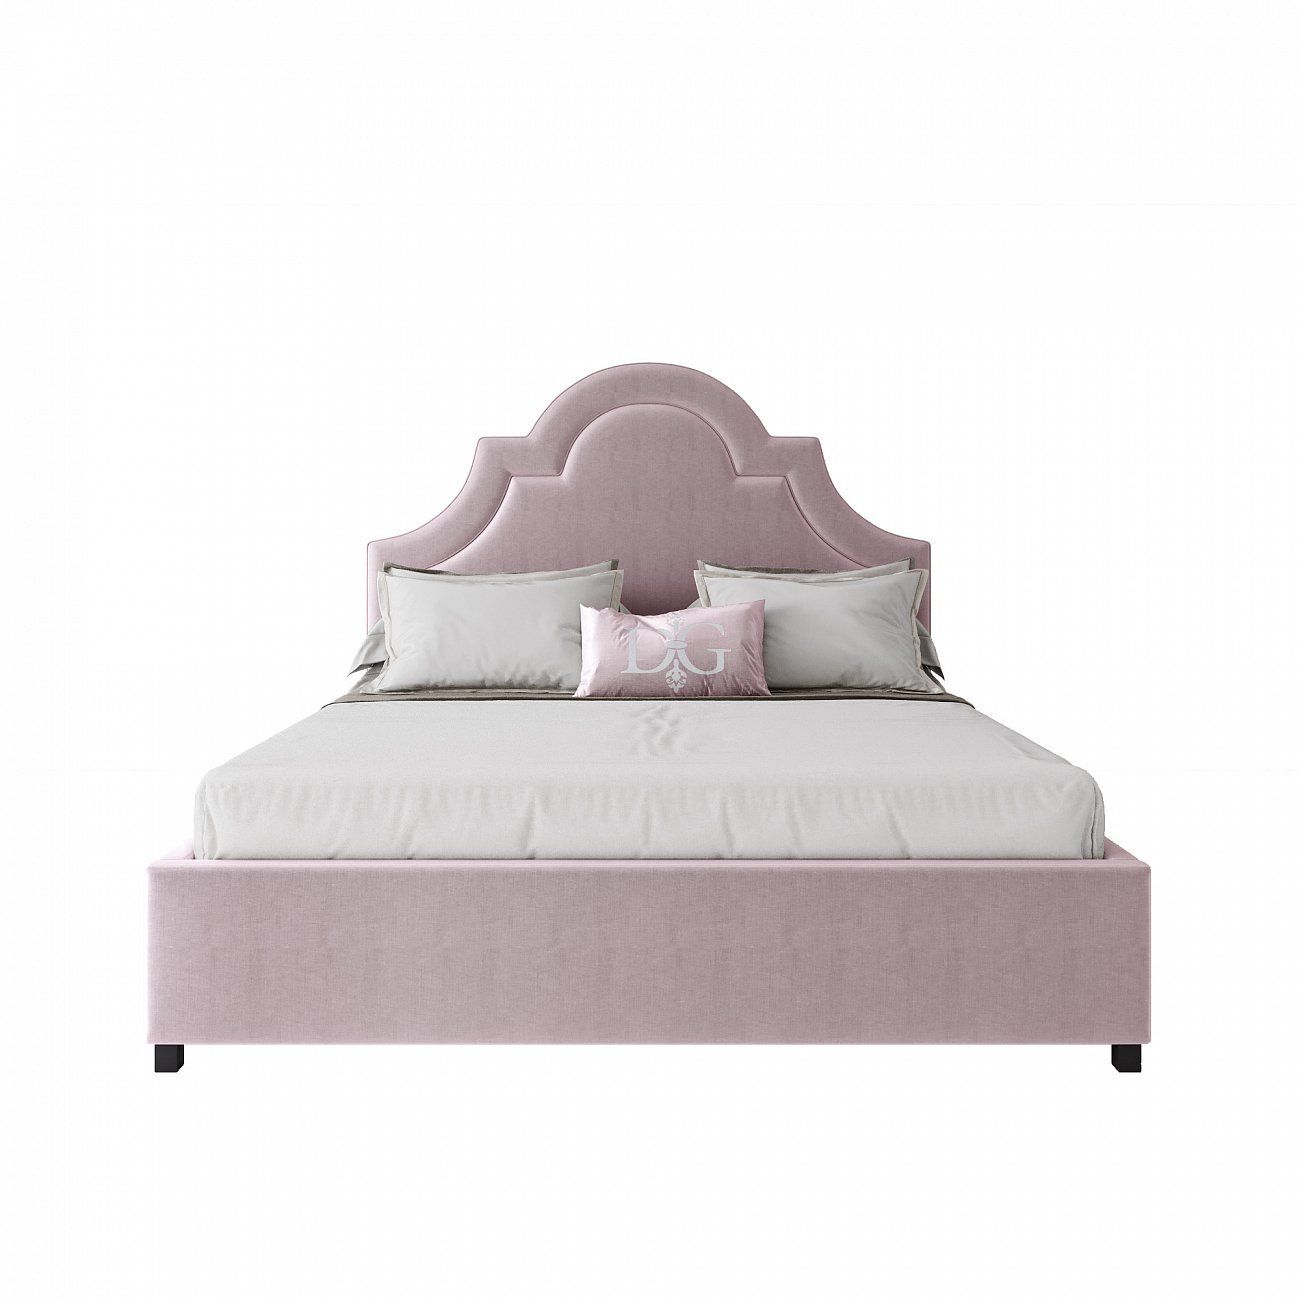 Double bed 160x200 cm pink Kennedy